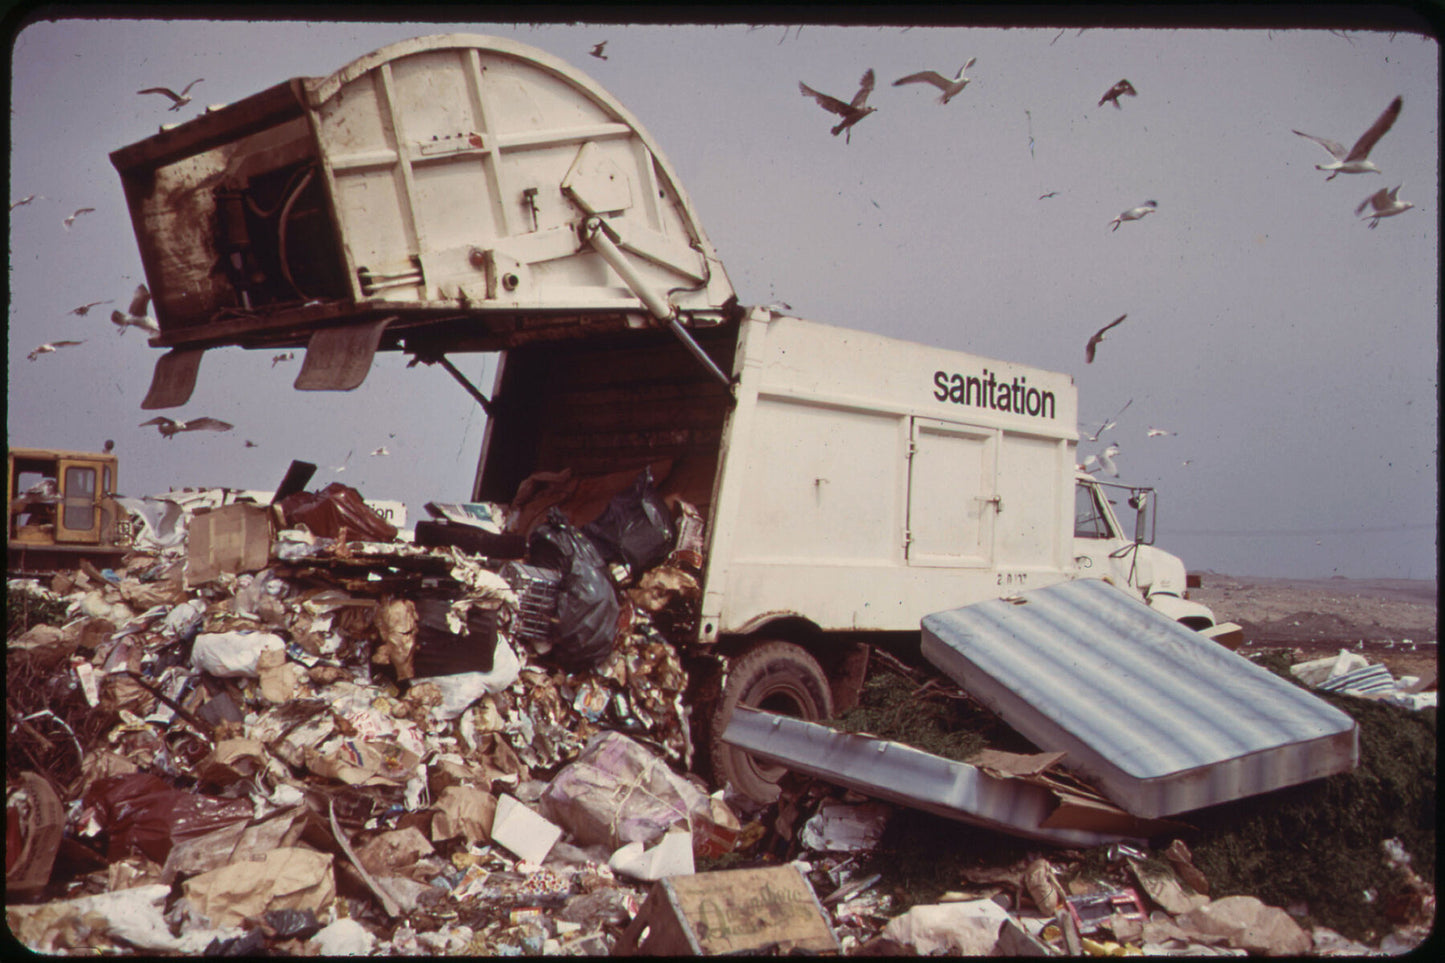 Landfill Operation Is Conducted by the City of New York on the Marshlands of Jamaica Bay by Arthur Tress - 1973